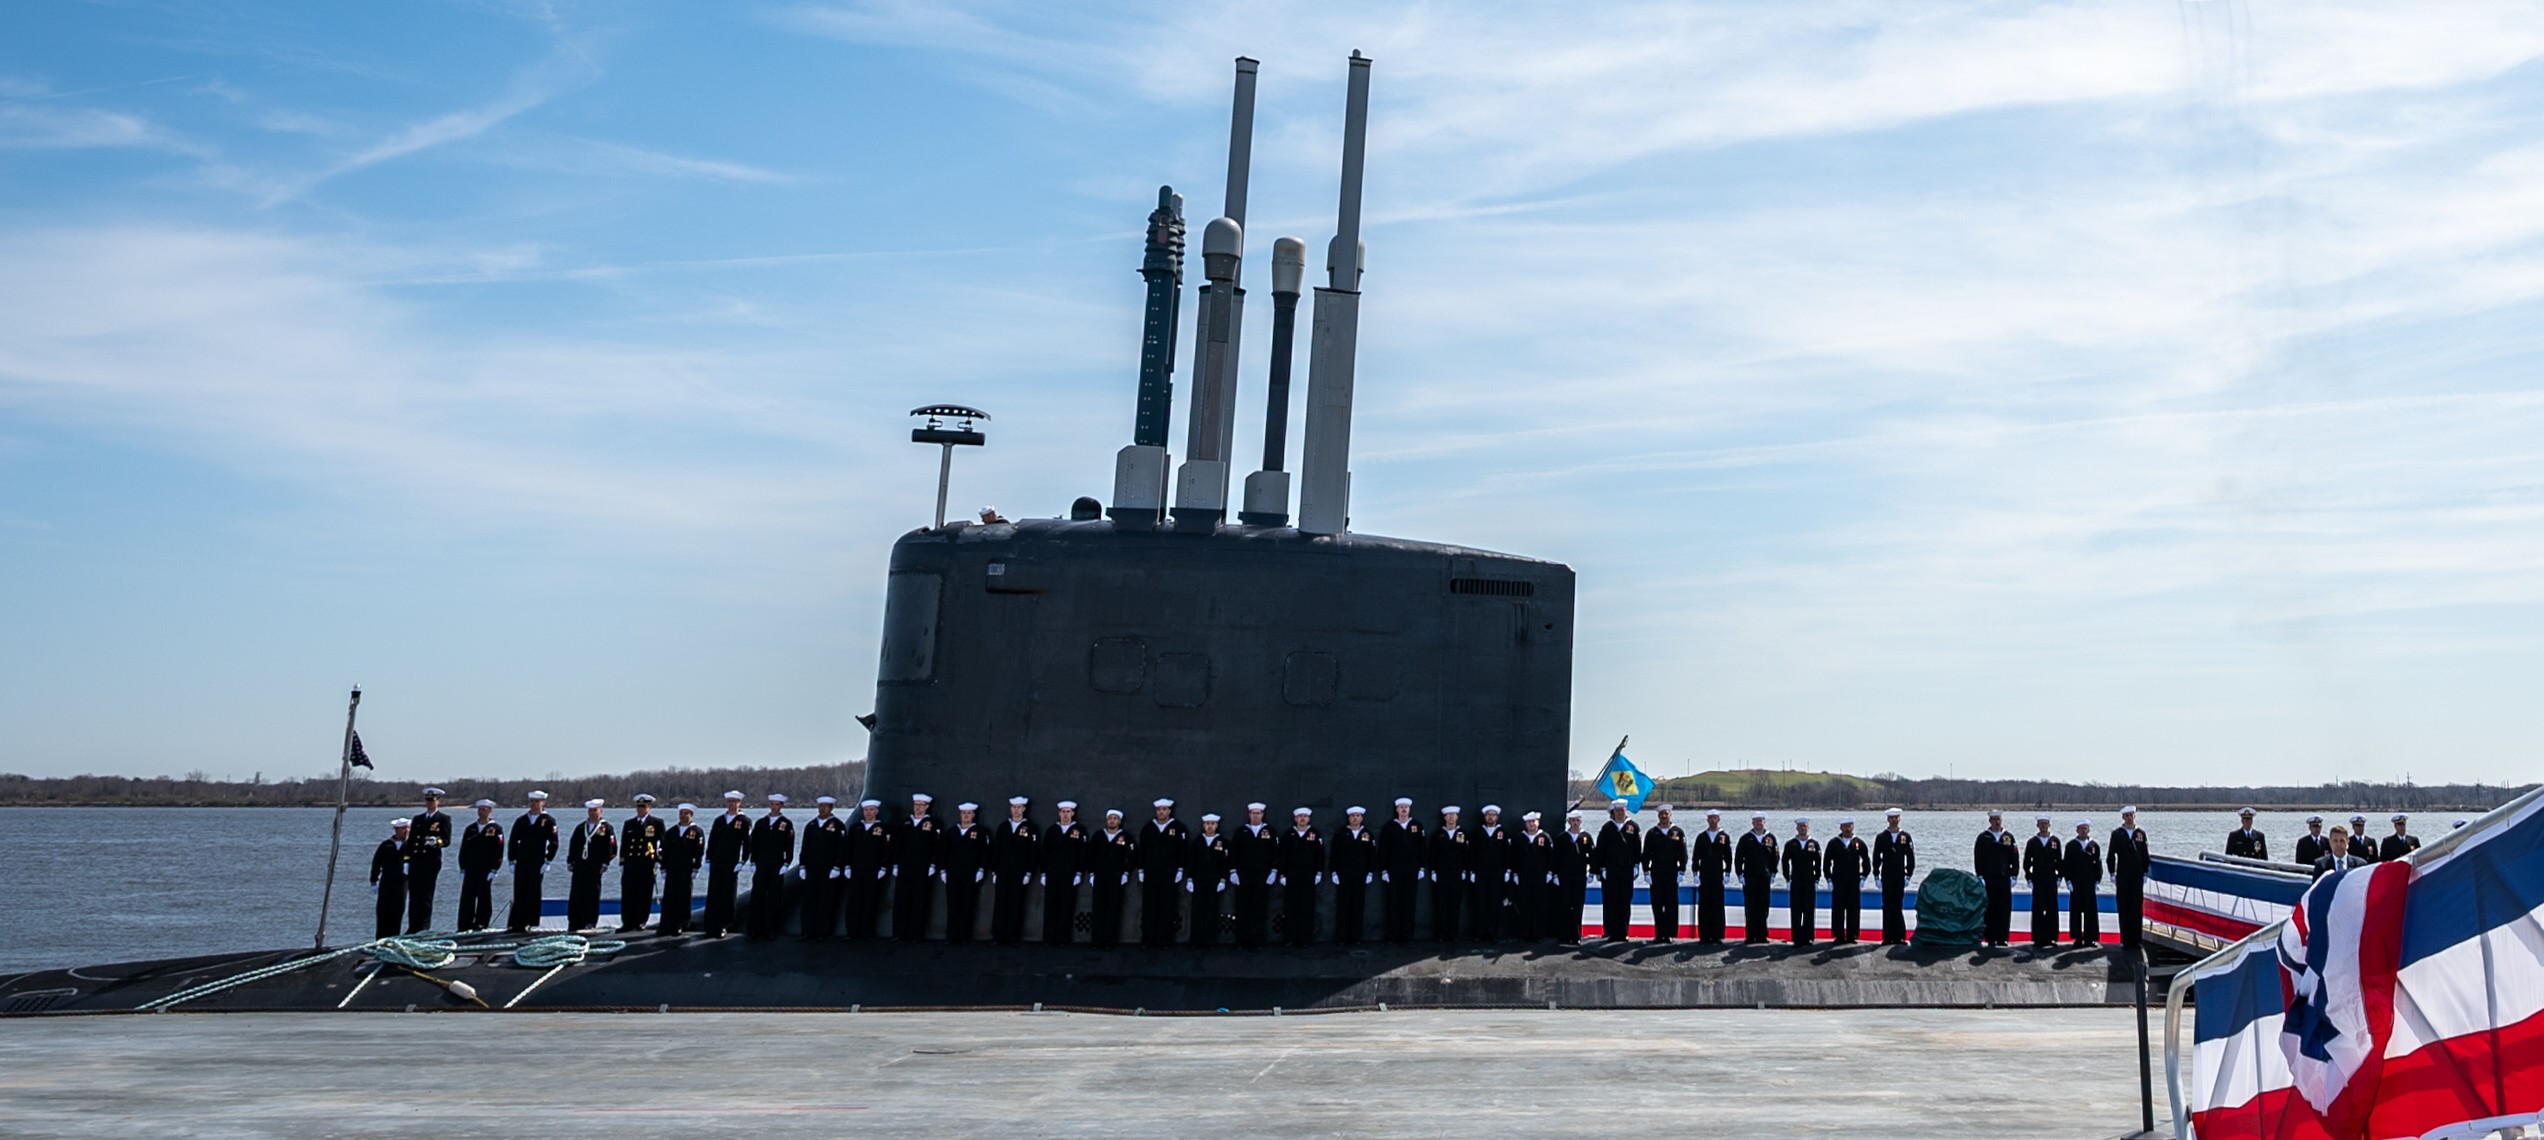 ssn-791 uss delaware virginia class attack submarine us navy commissioning 25